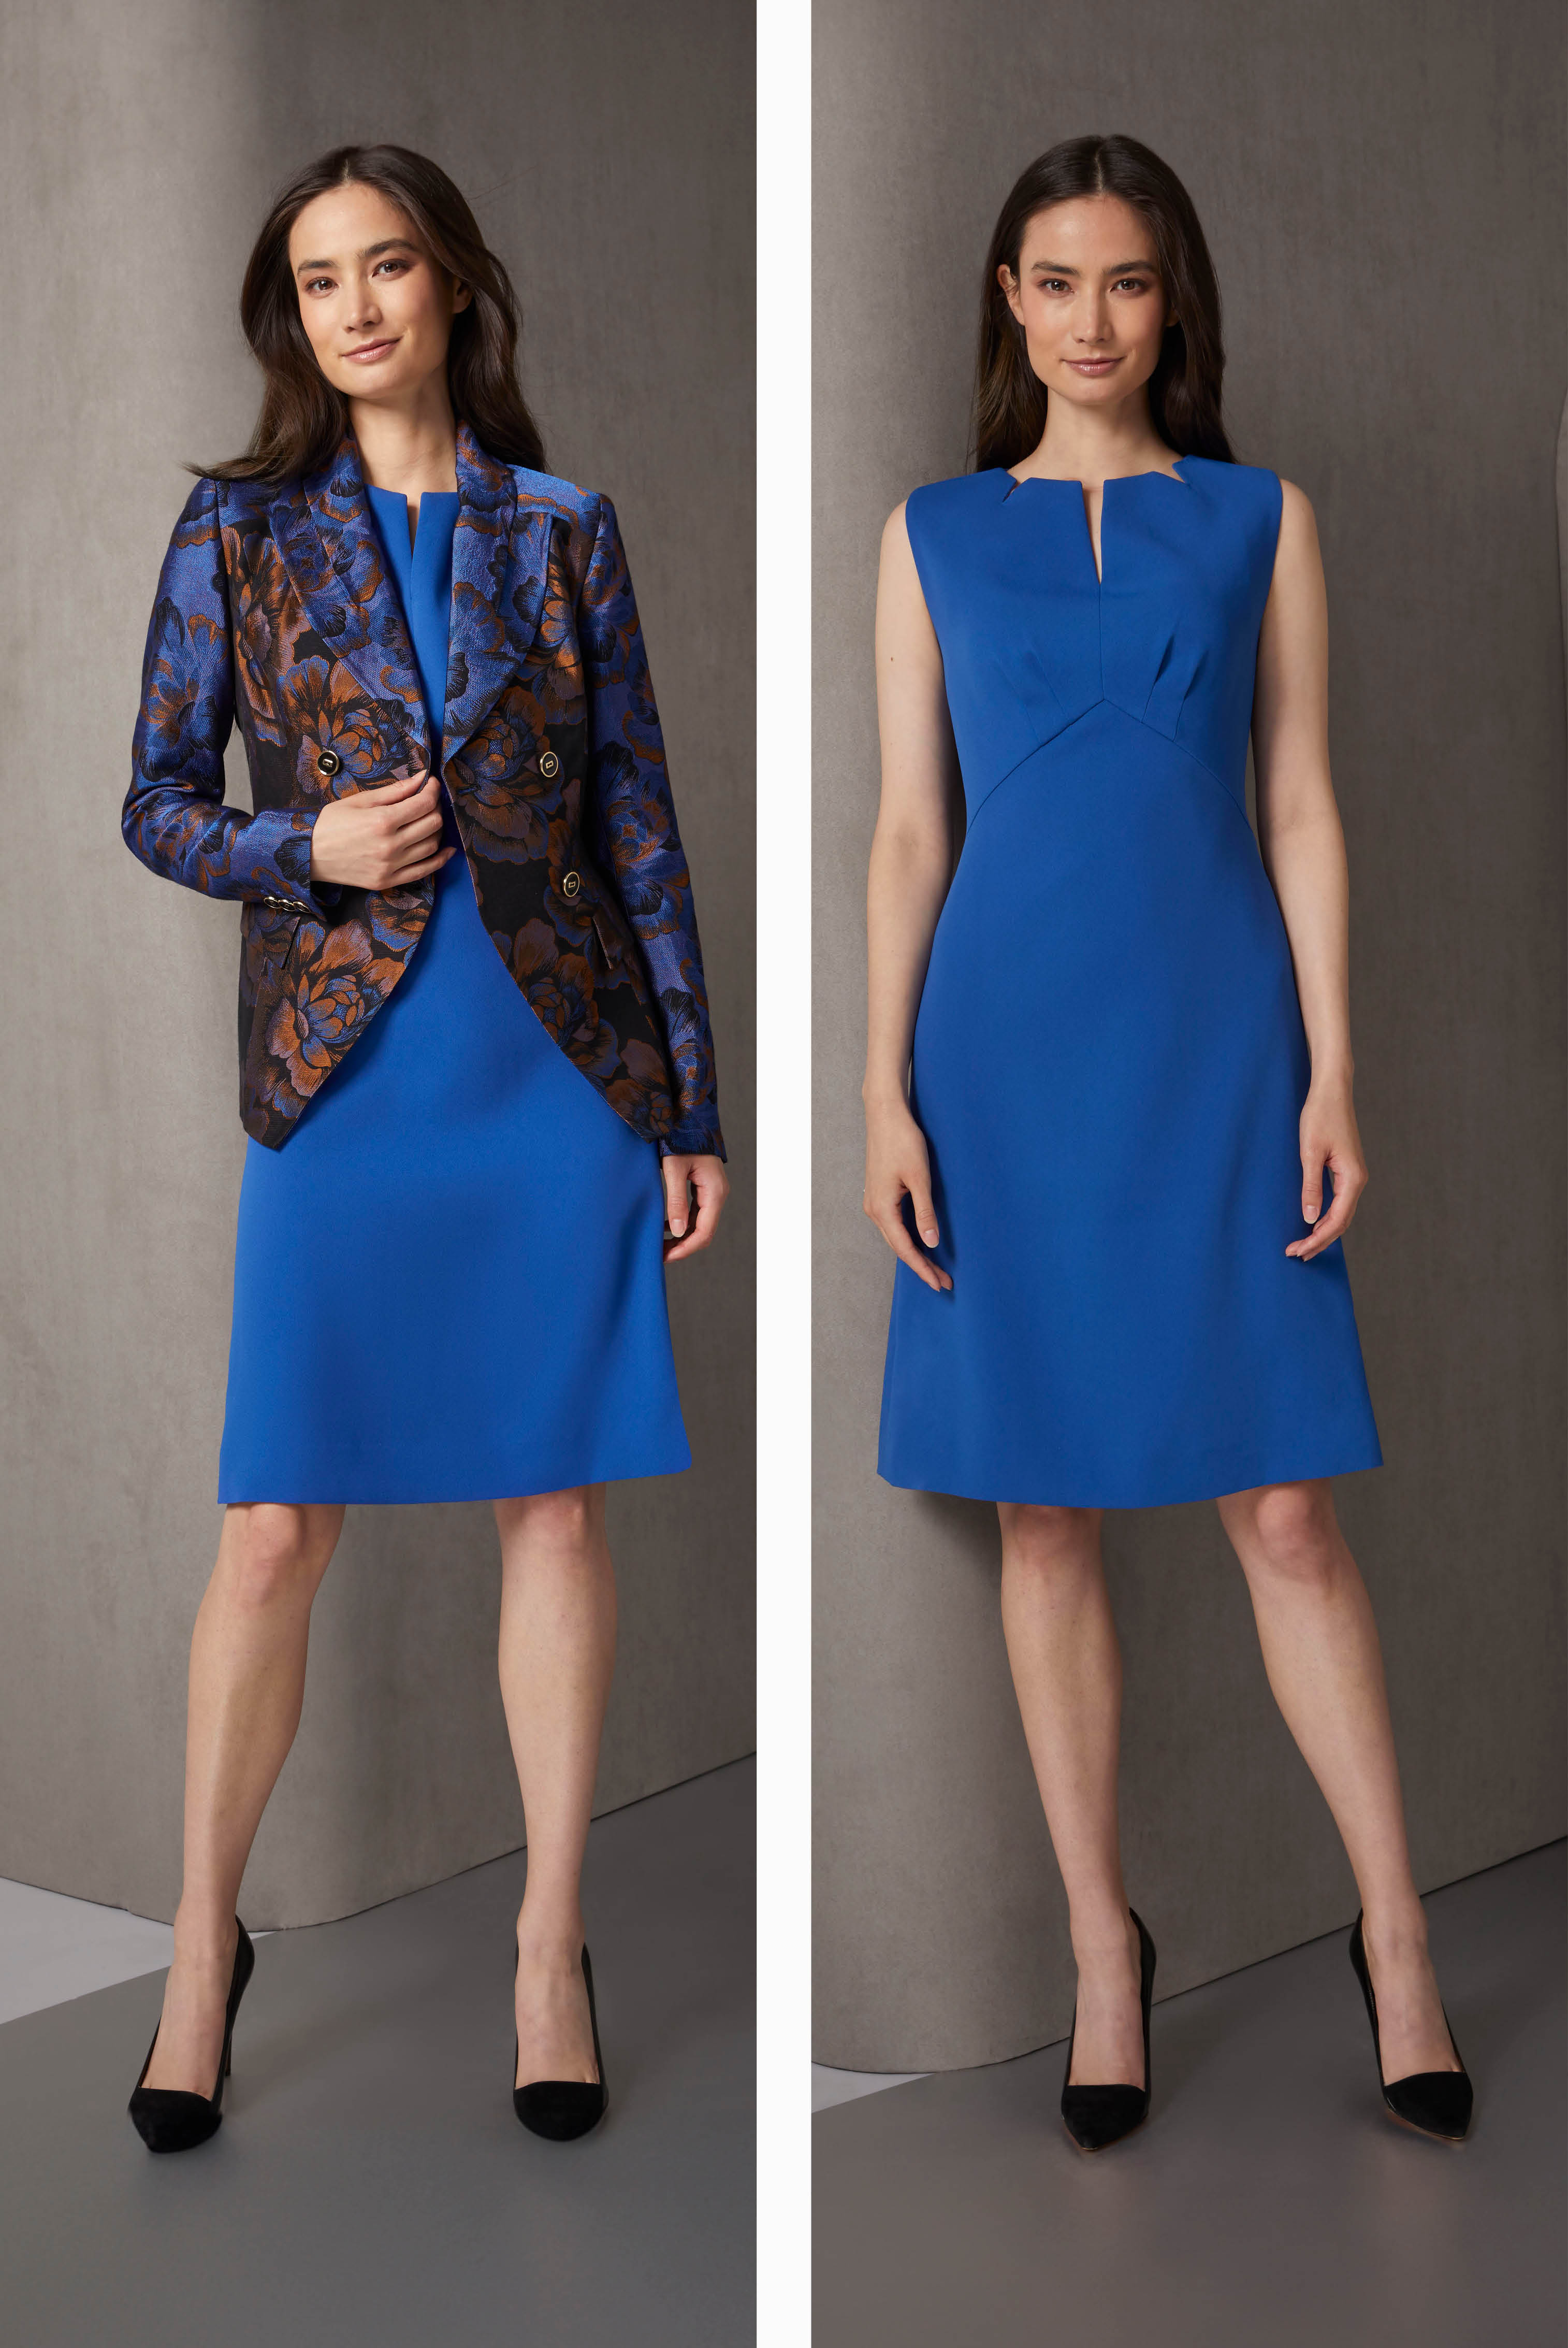 Wardrobe to dazzle at special holiday events in this blue Japanese crêpe sheath dress, layered with a tuxedo jacket in a two-sided French jacquard. The cutaway jacket is patterned with photogenic oversized flowers in glowing gemtone colors.